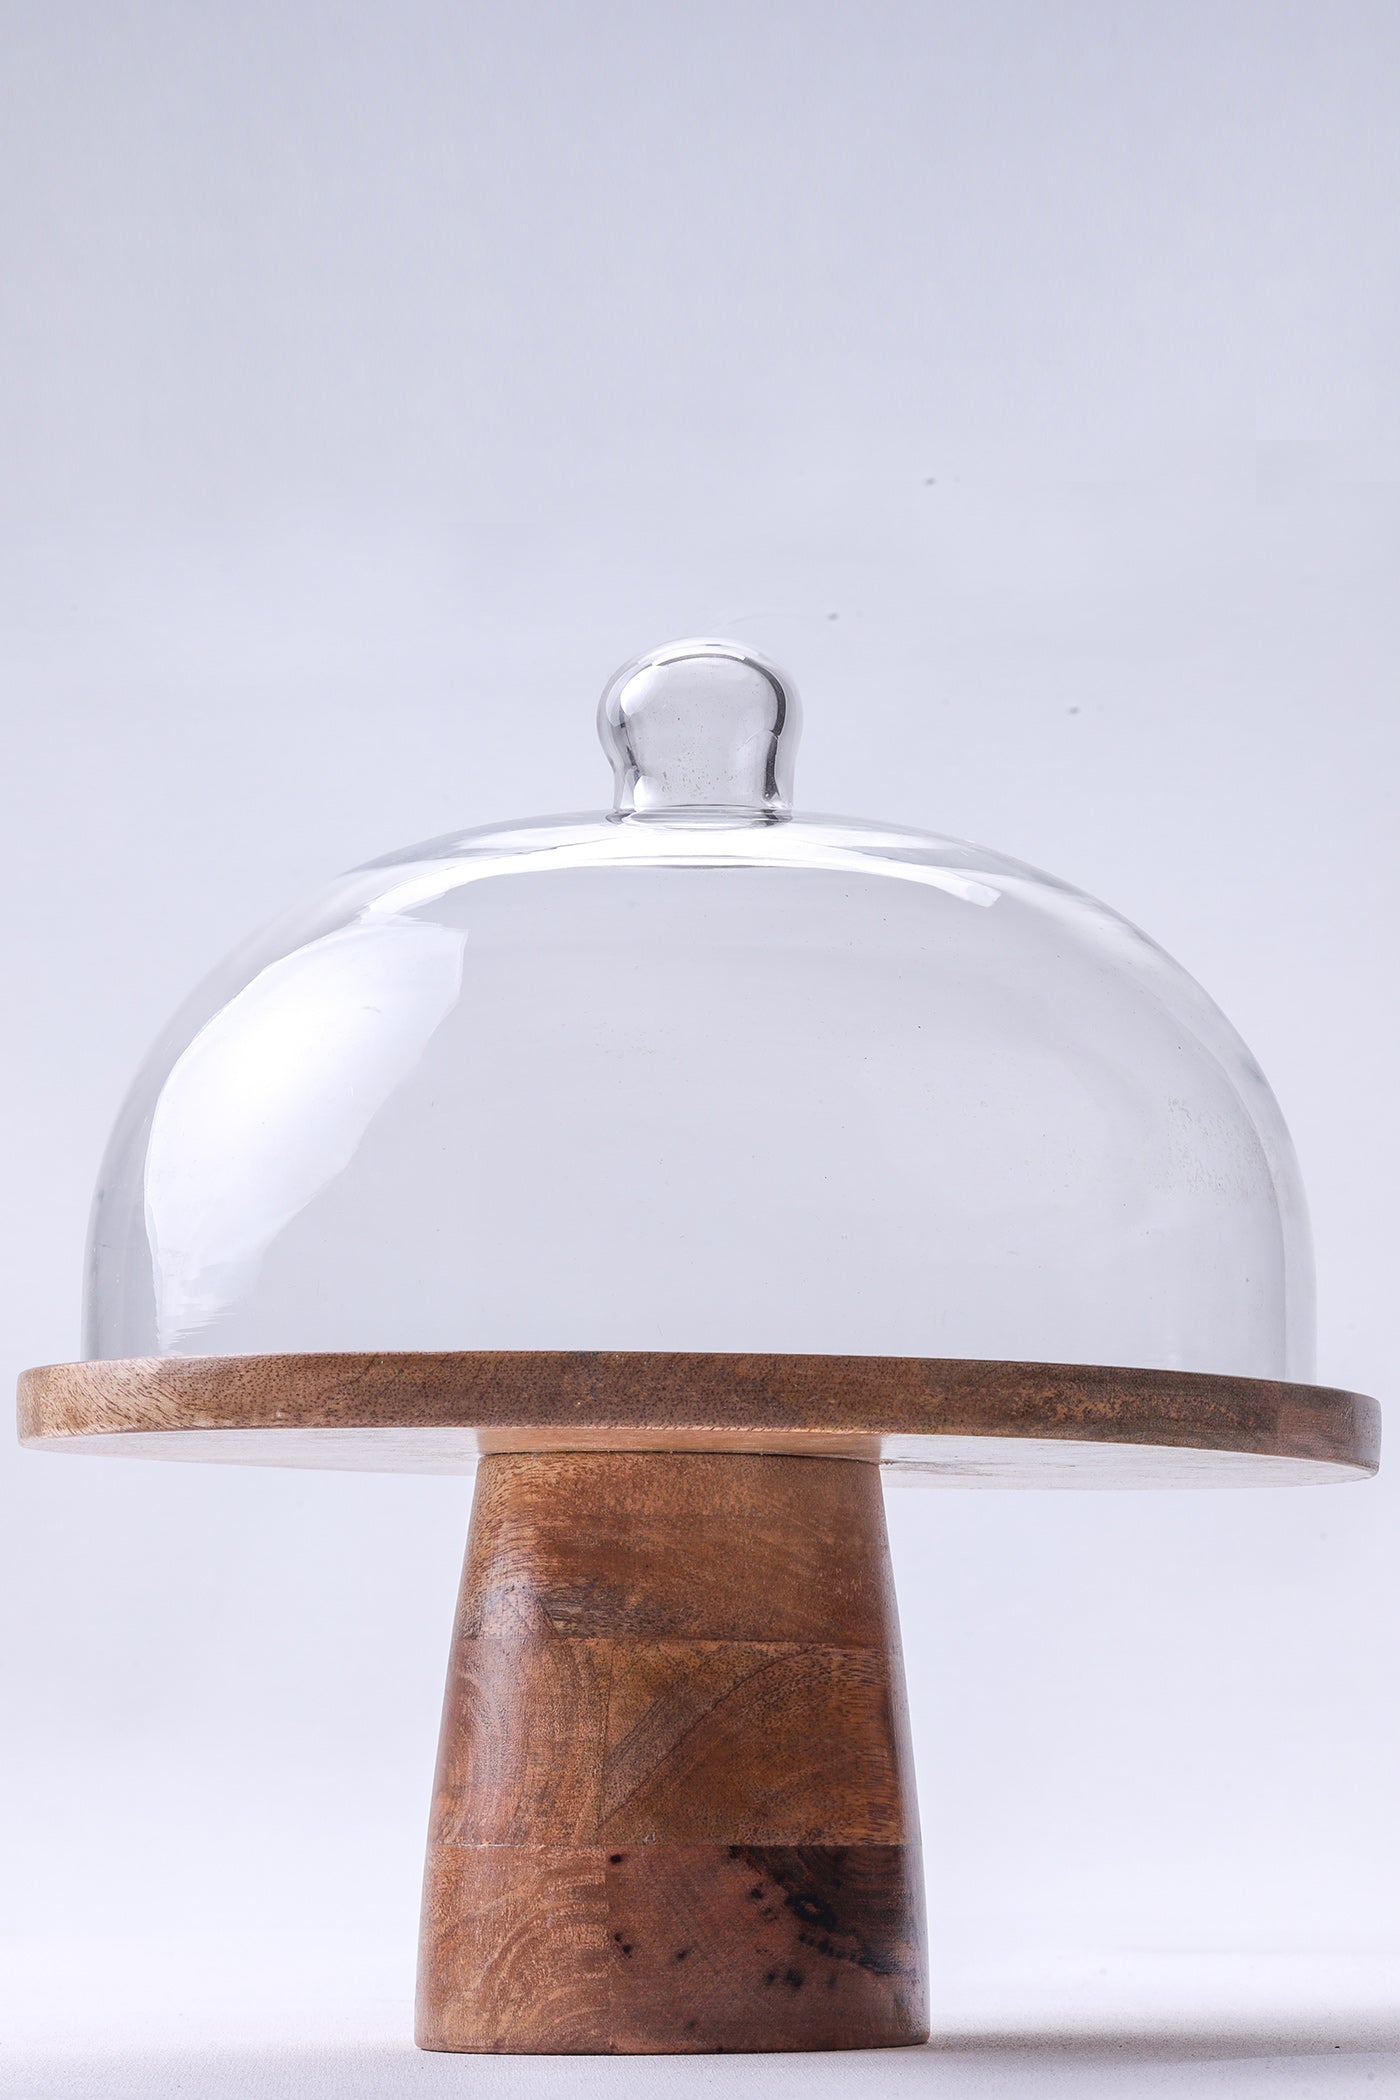 Whitewash Cakestand With Dome